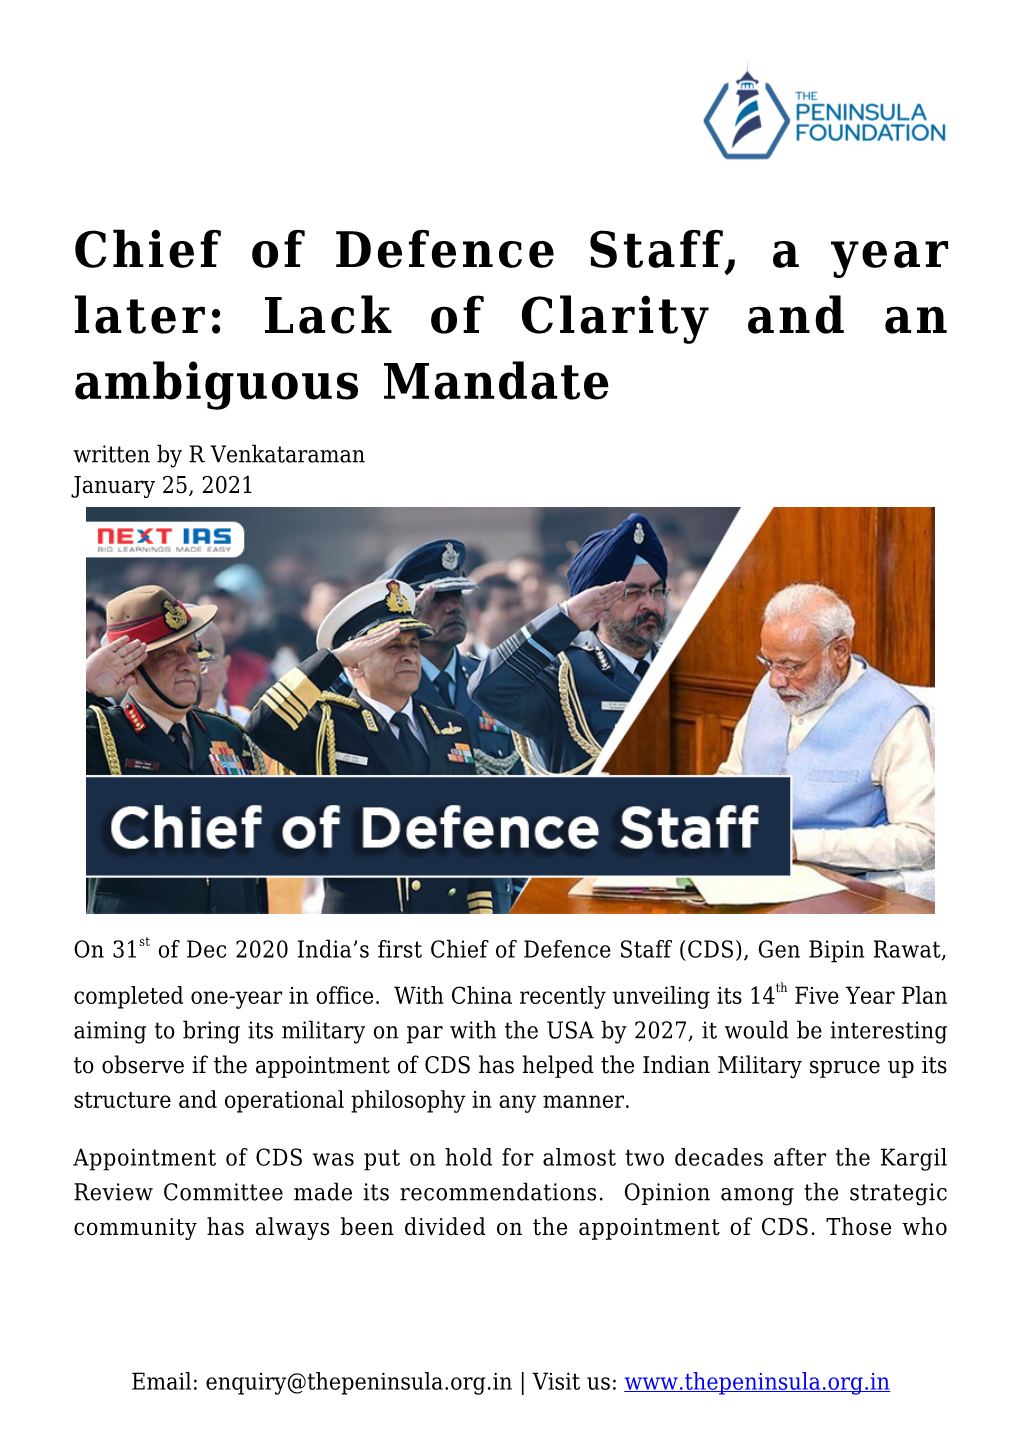 Chief of Defence Staff, a Year Later: Lack of Clarity and an Ambiguous Mandate Written by R Venkataraman January 25, 2021